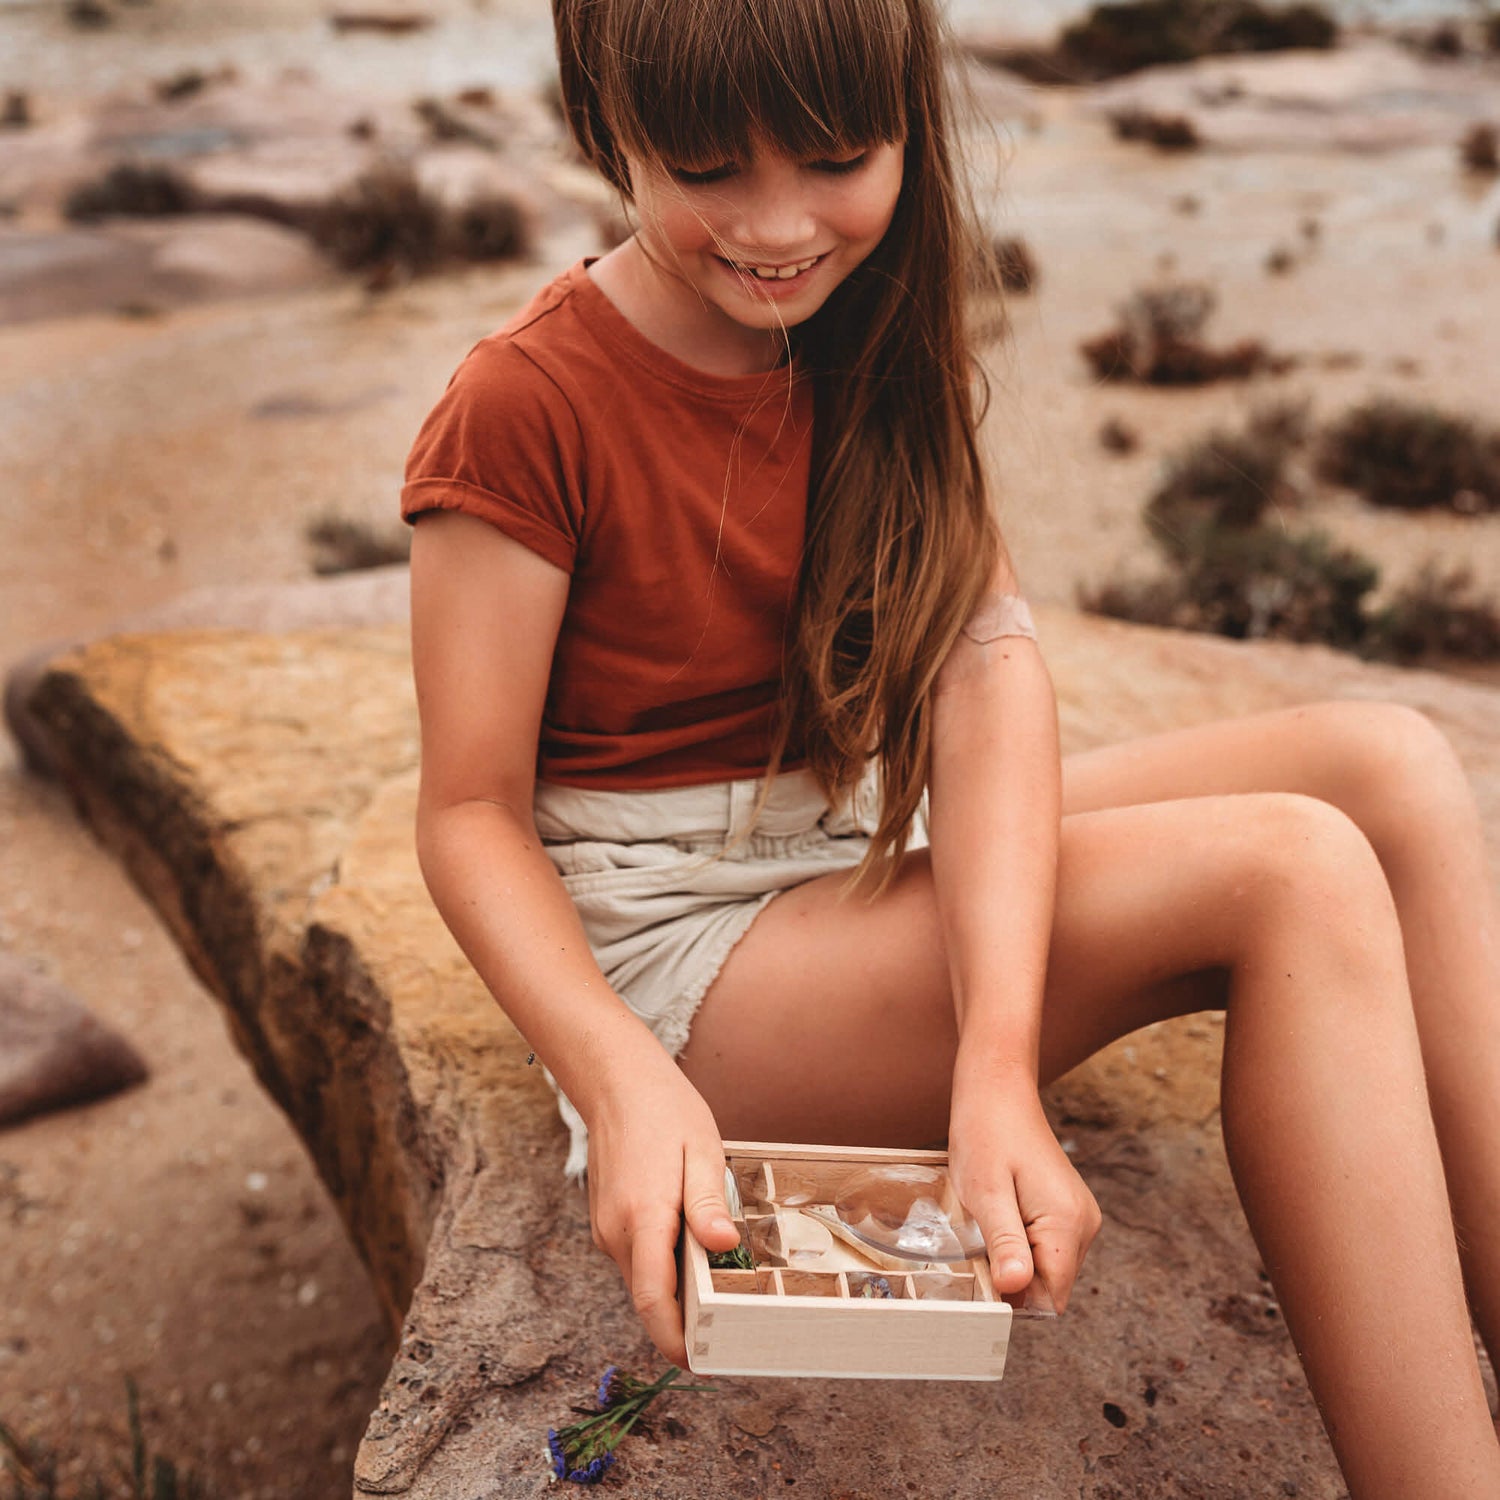 Girl at beach placing nature inside Wooden bug box made by Kikkerland from Your Wild Books. Crab claw, flowers, and shells inside the wooden compartments with magnifying lenses.